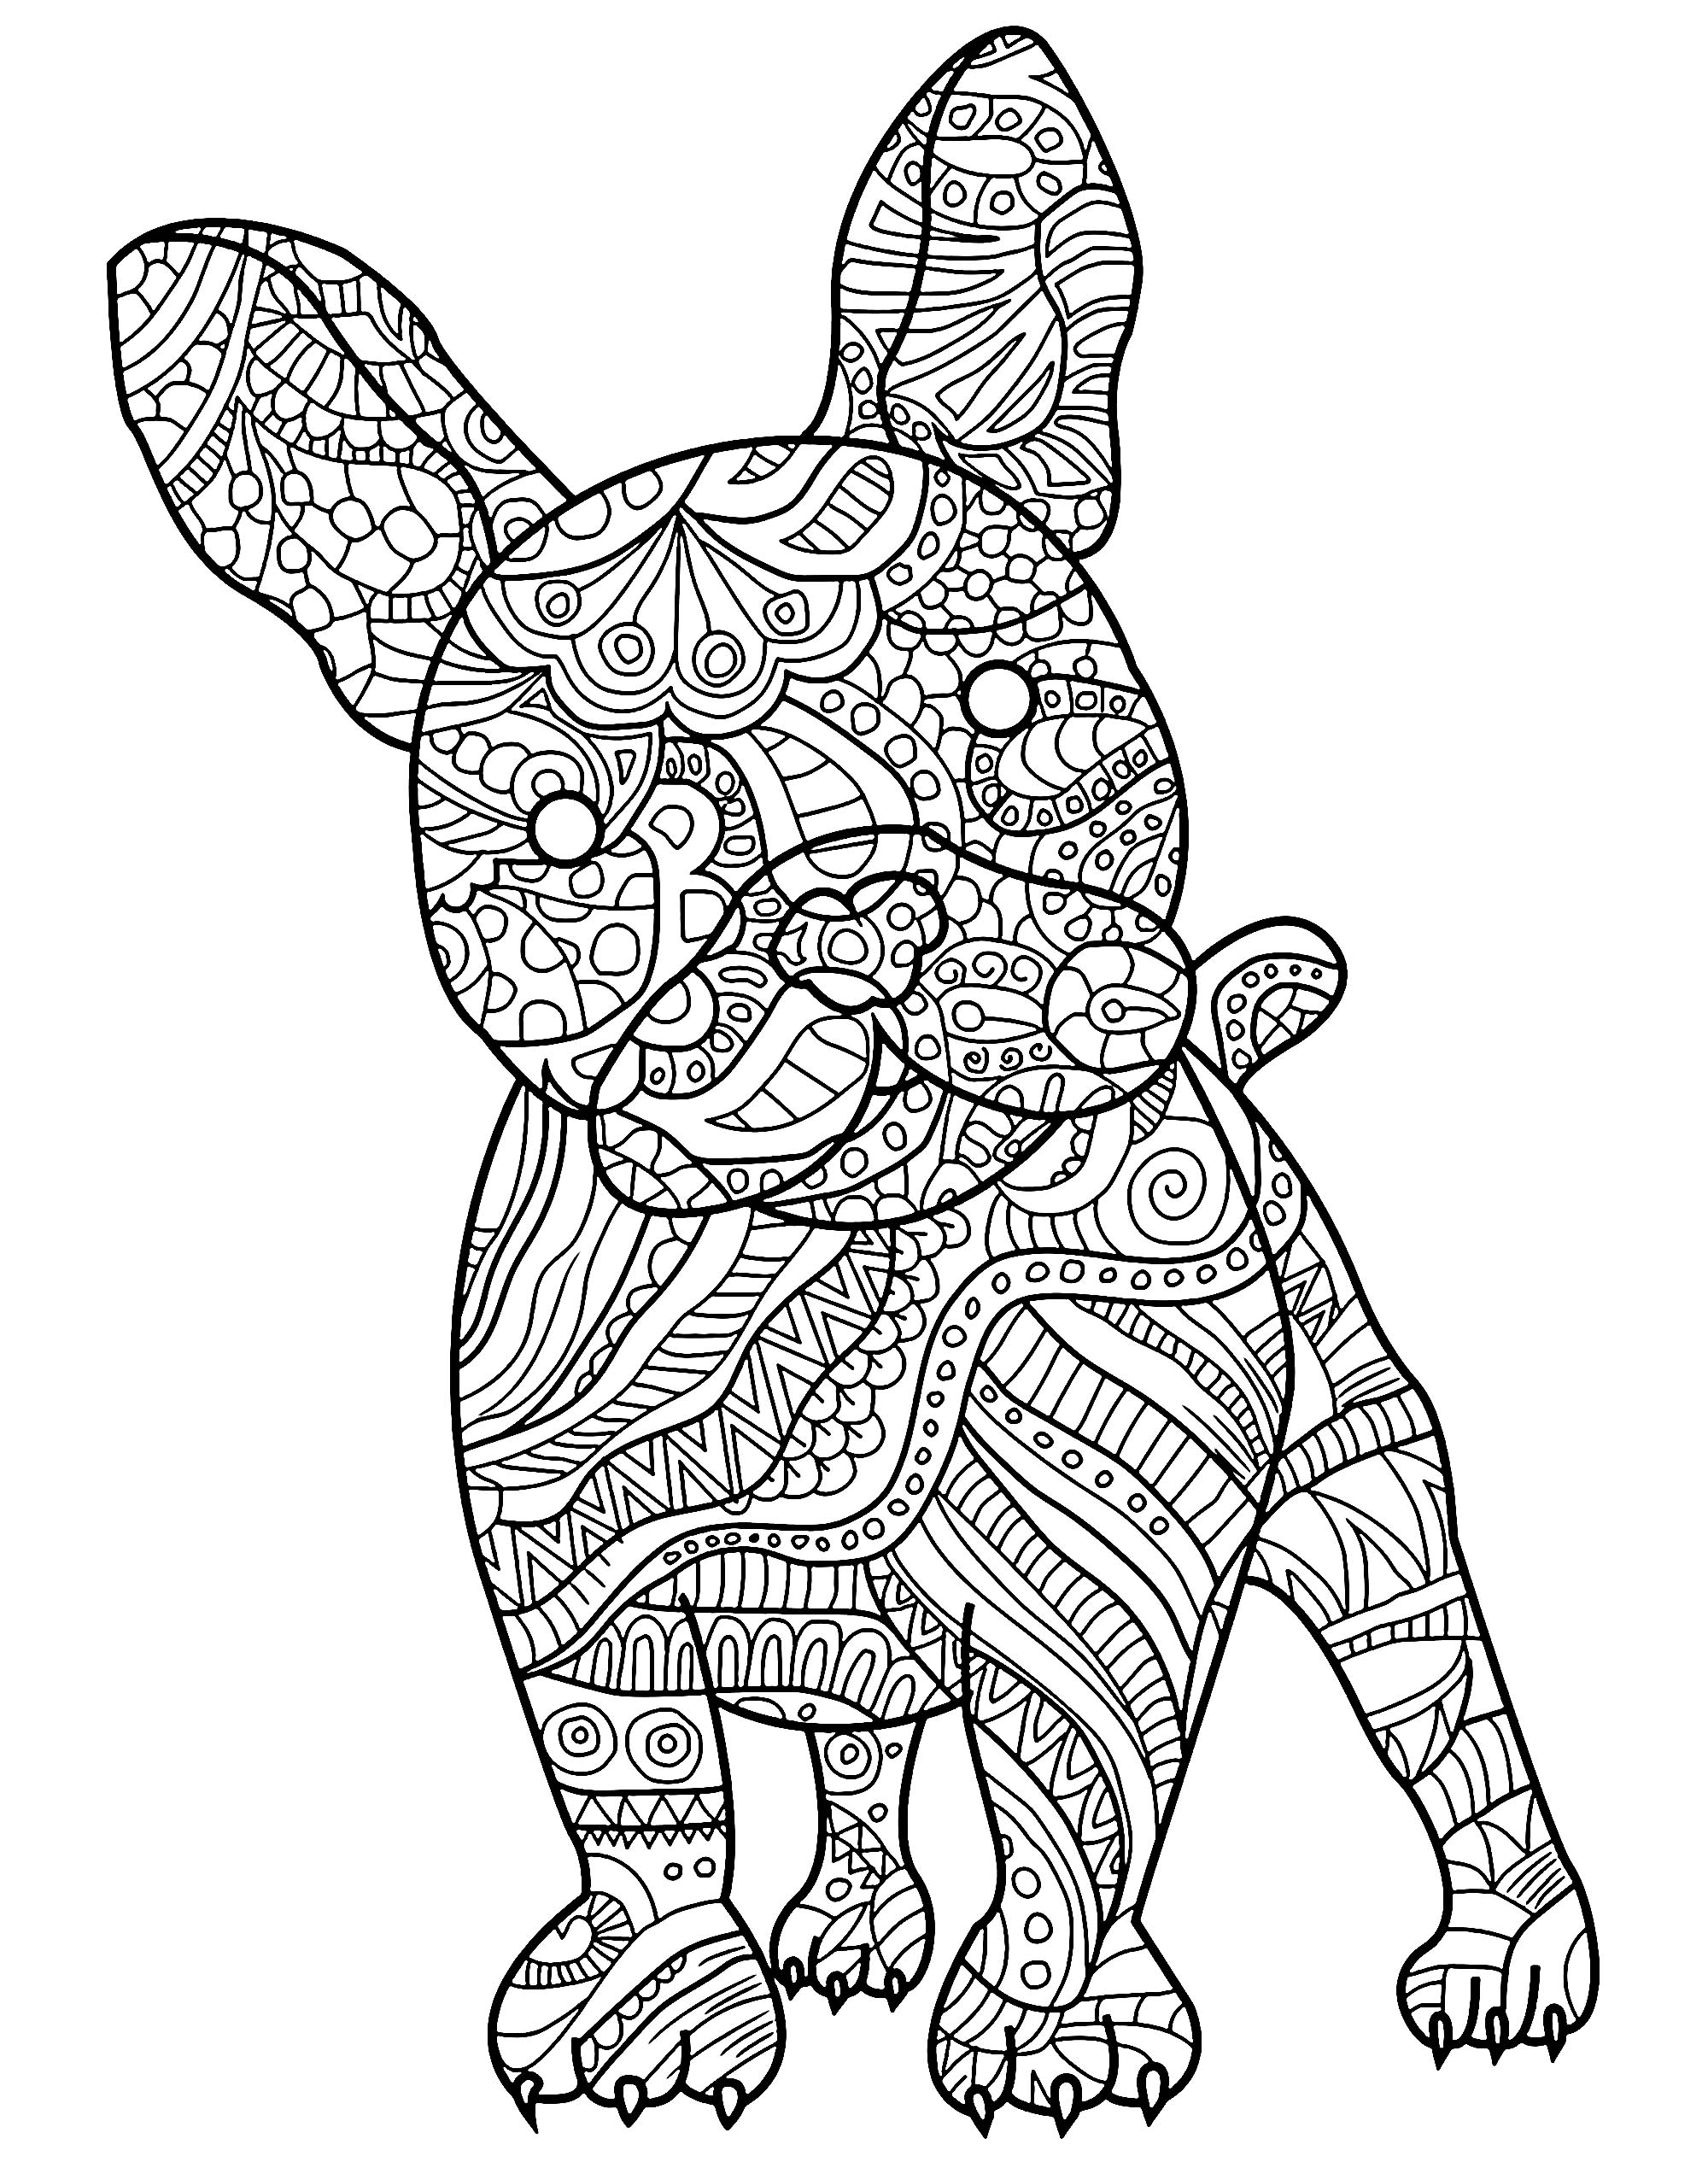 free-printable-dog-coloring-pages-for-kids-dog-cartoon-and-coloring-pages-coloring-pages